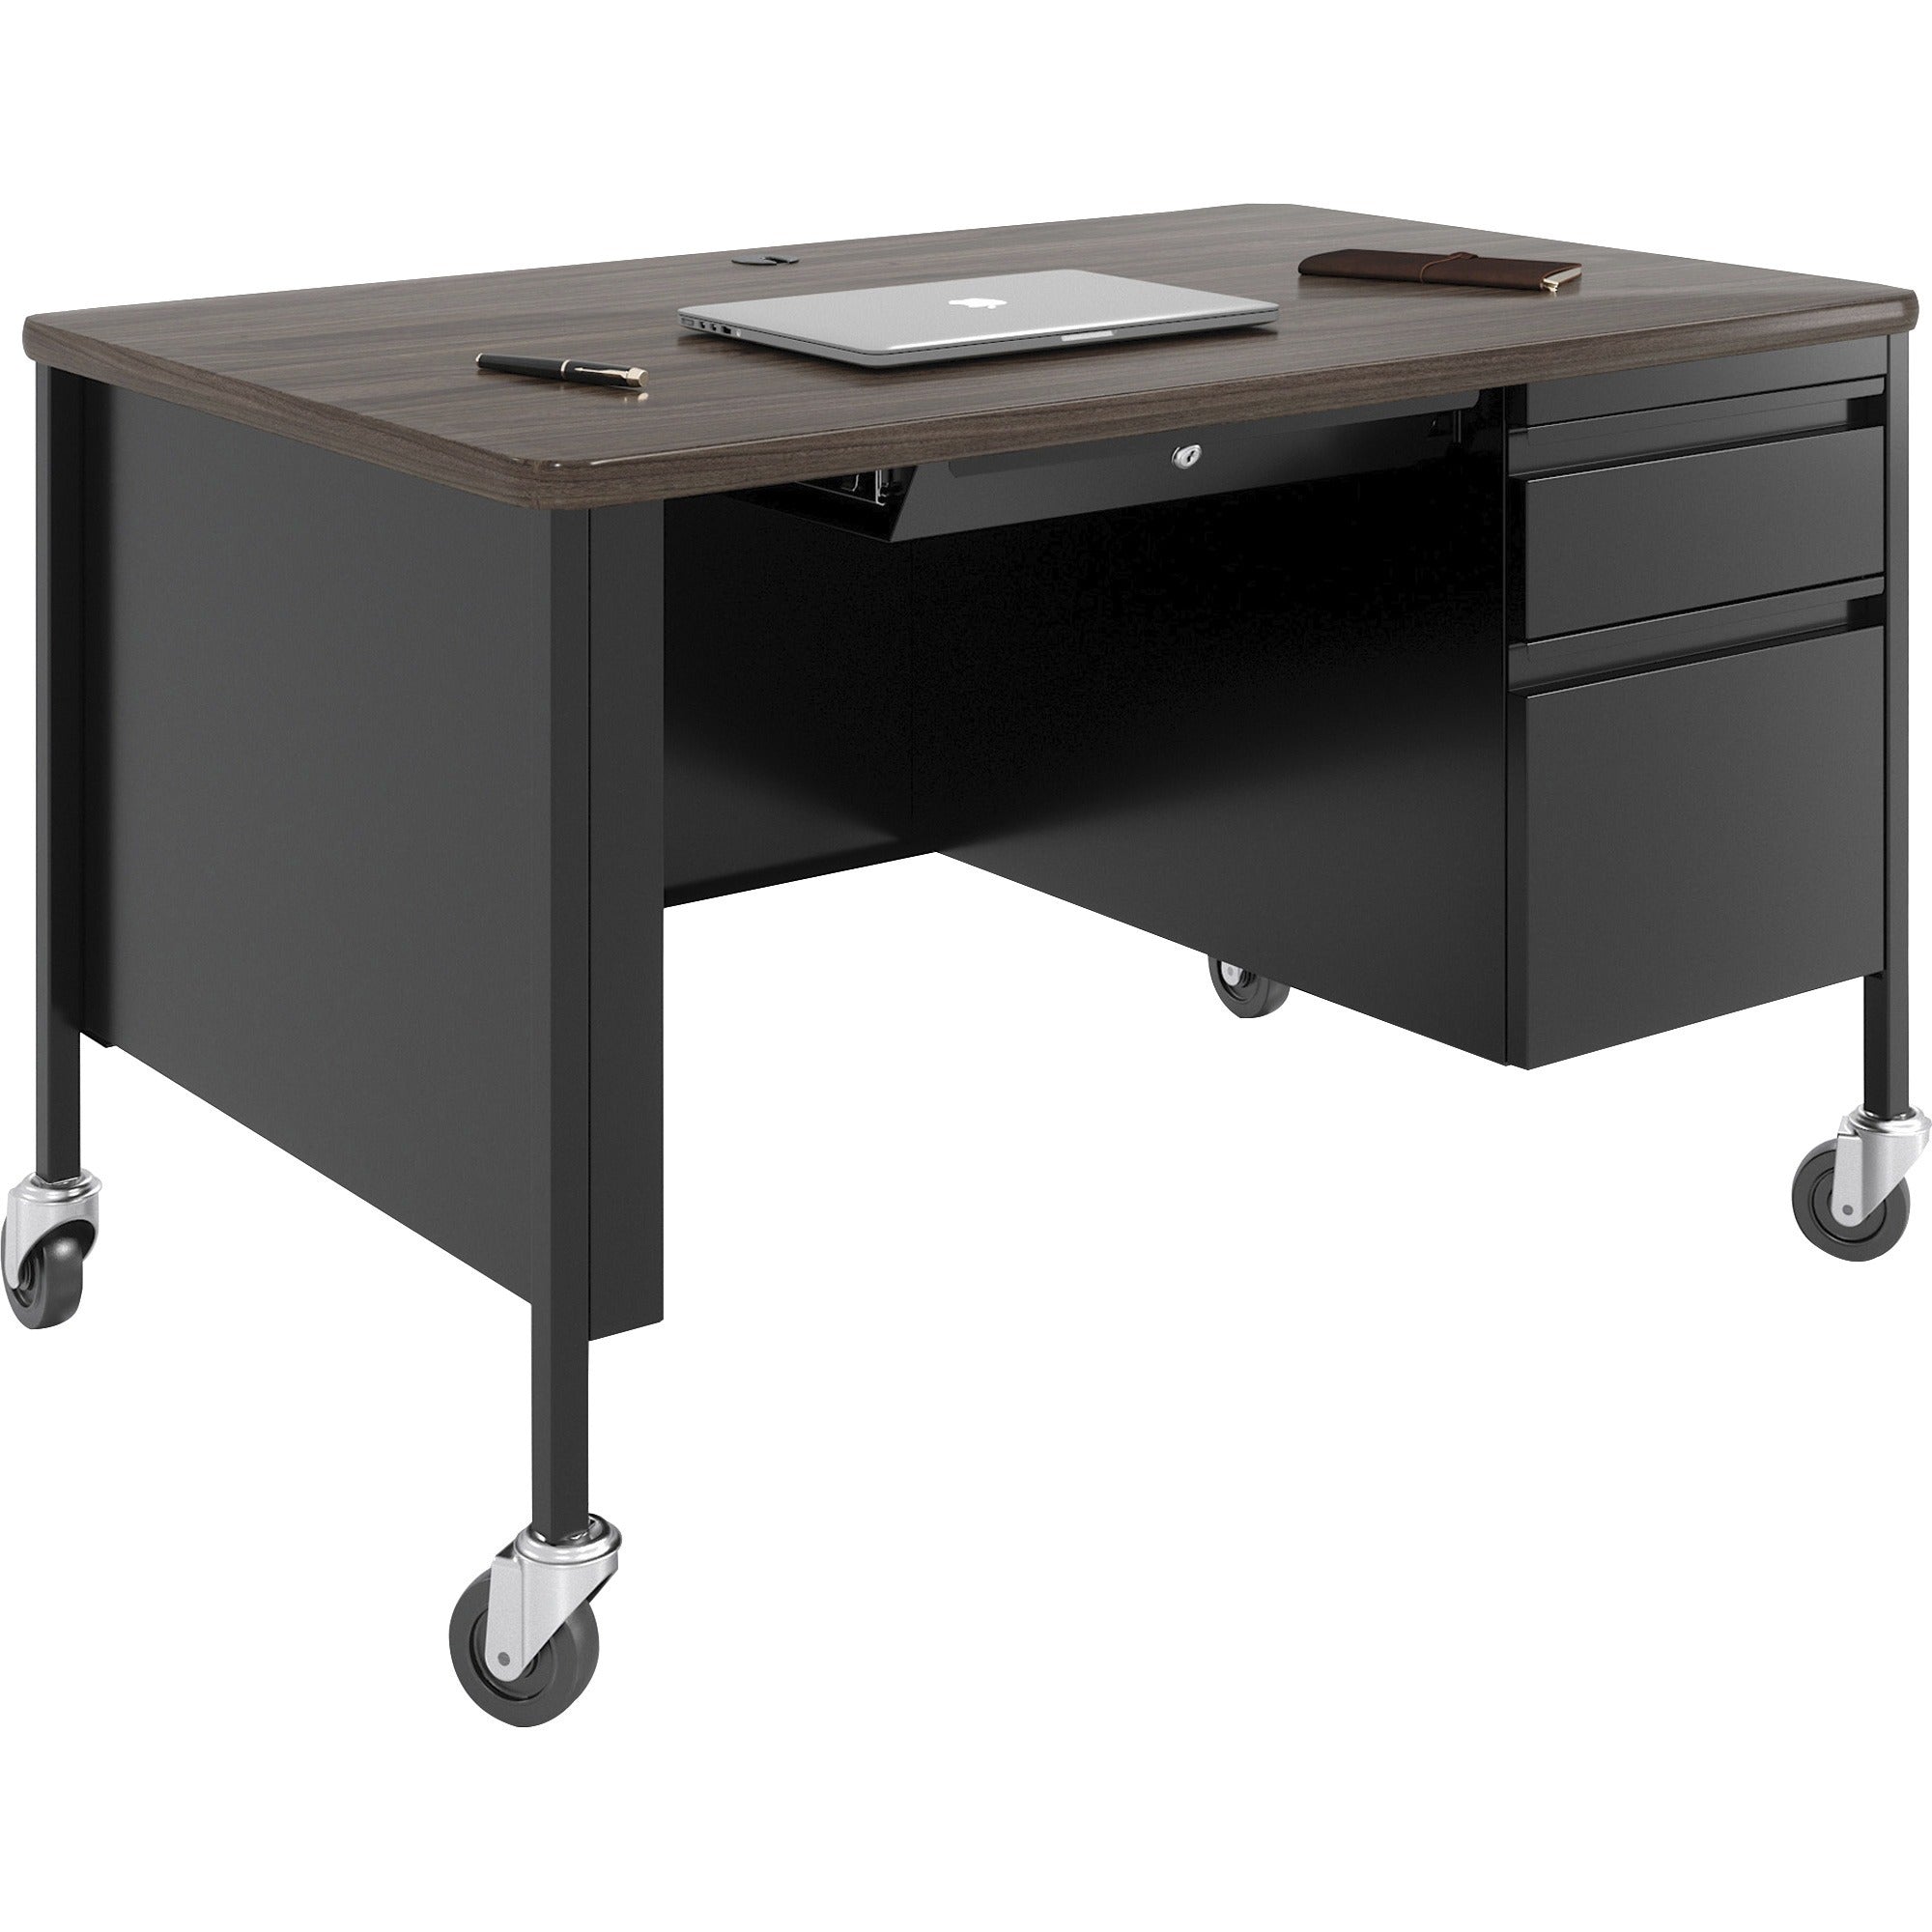 lorell-fortress-series-48-mobile-right-pedestal-teachers-desk-48-x-30295-box-file-drawers-single-pedestal-on-right-side-t-mold-edge_llr66943 - 3